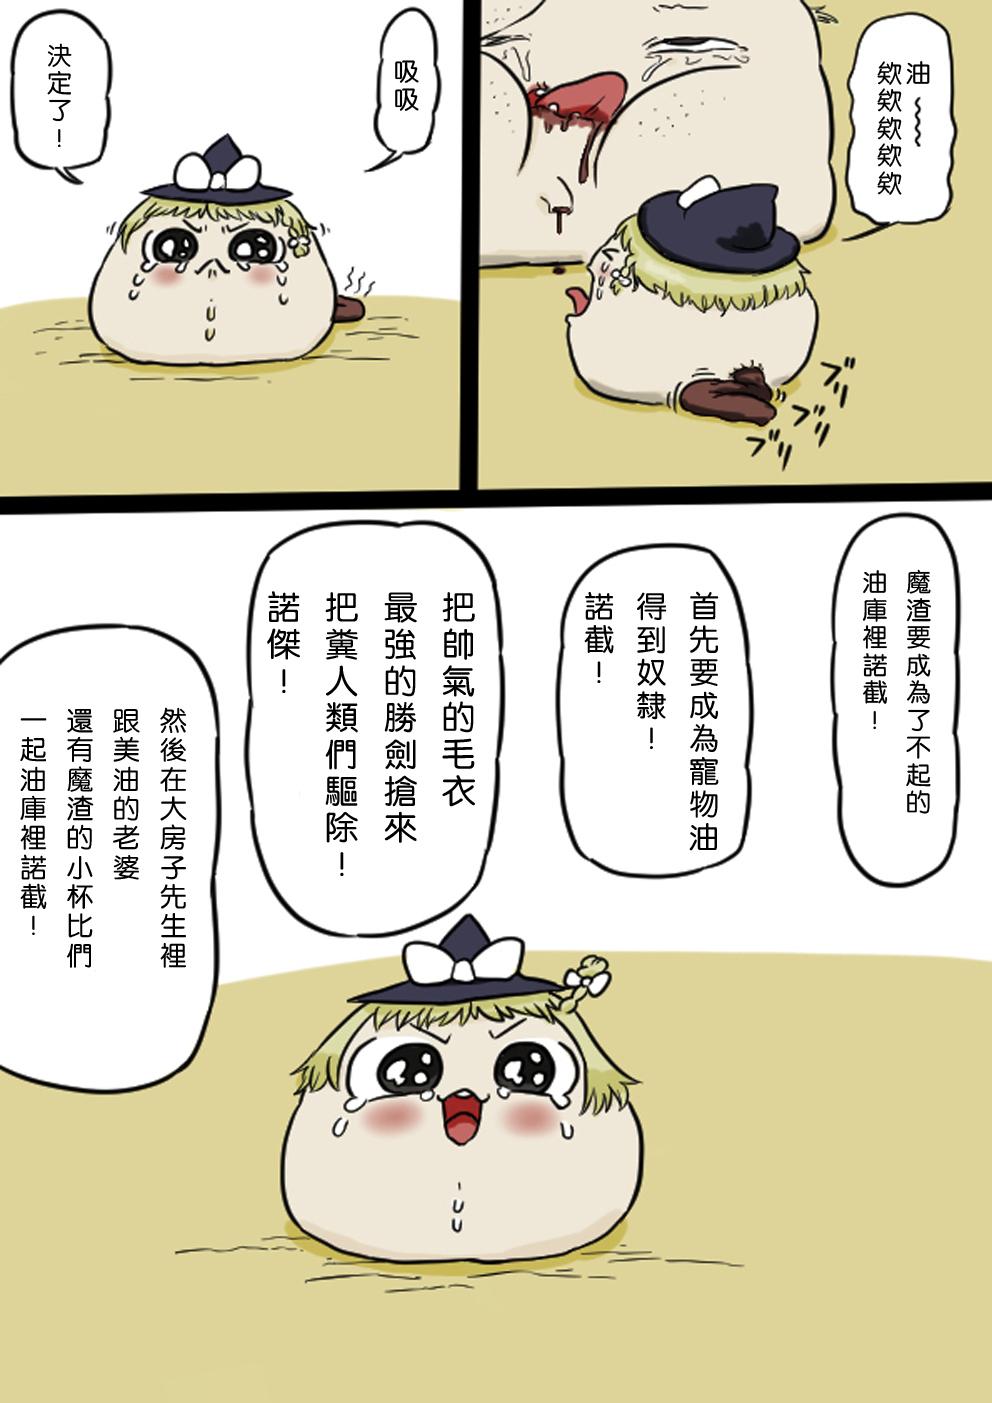 Safadinha すべてをてにいれたまりちゃ（Chinese） - Touhou project Ghetto - Page 2